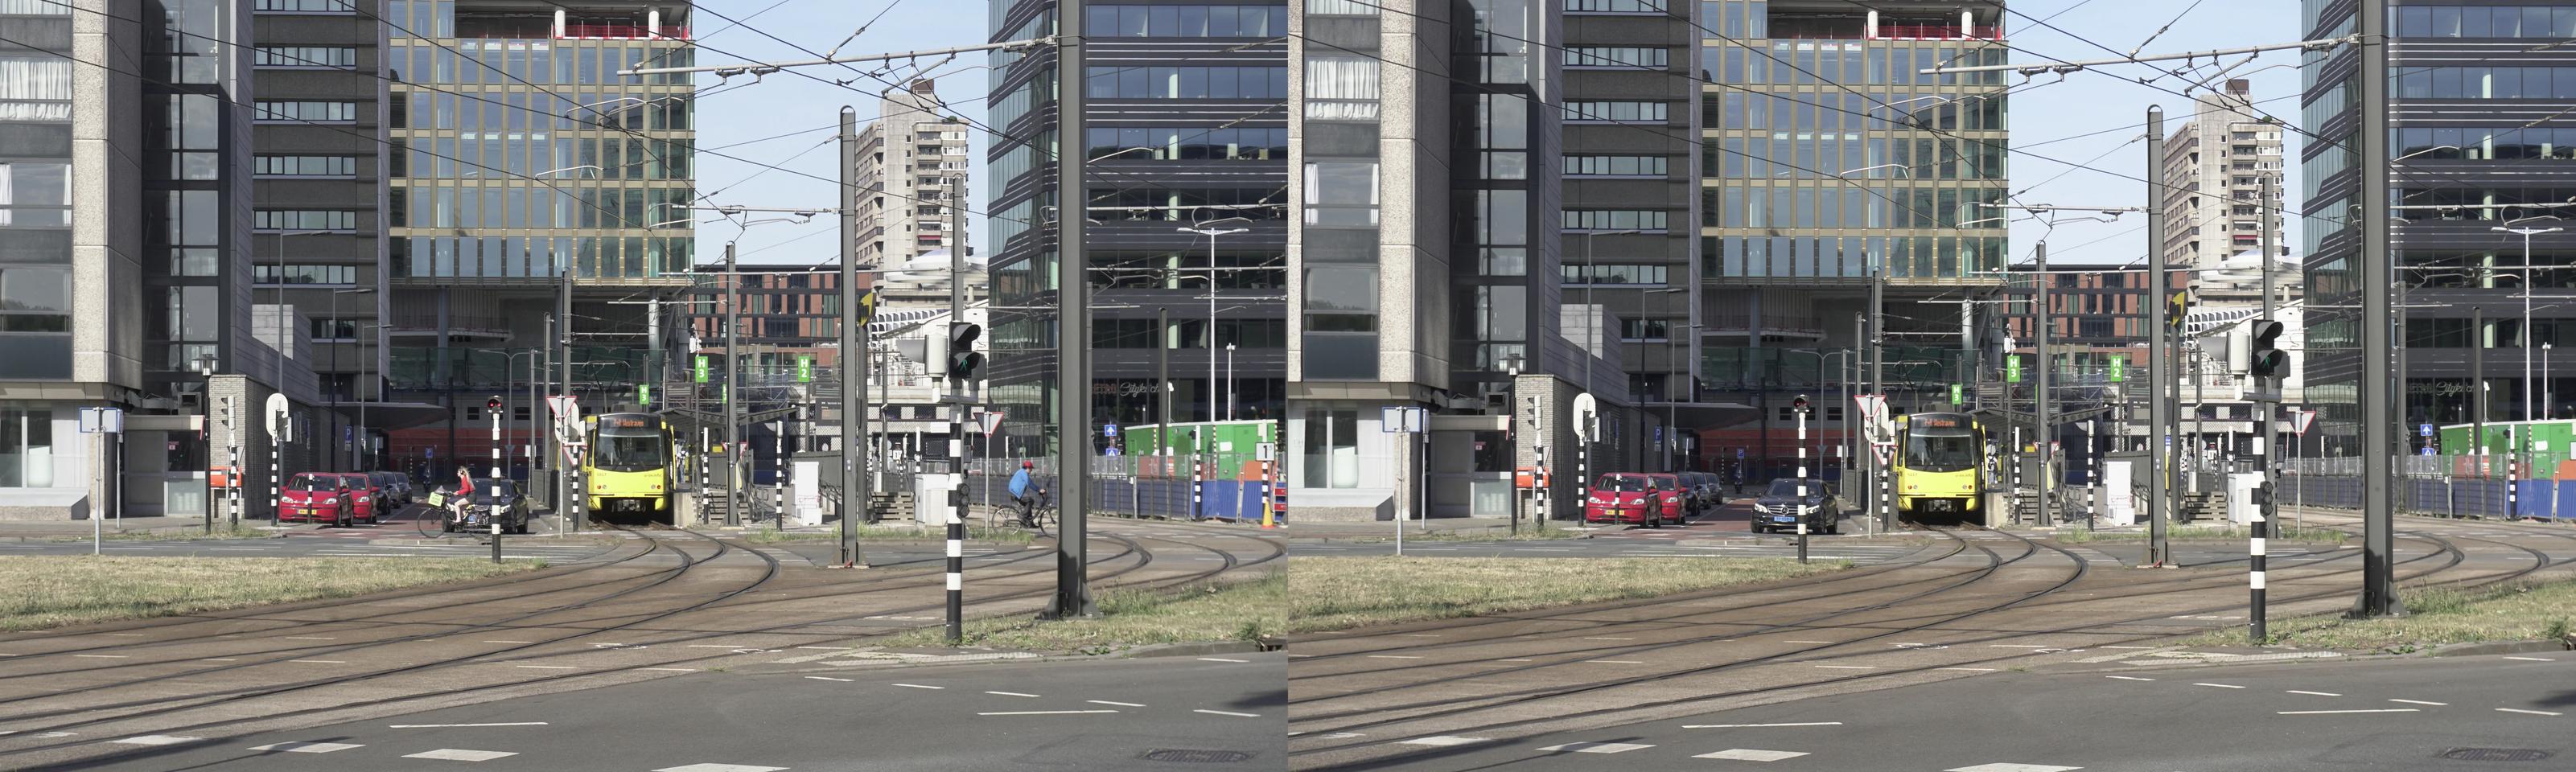 Lightrail to Westraven, Utrecht, Netherlands, May 31th 2020